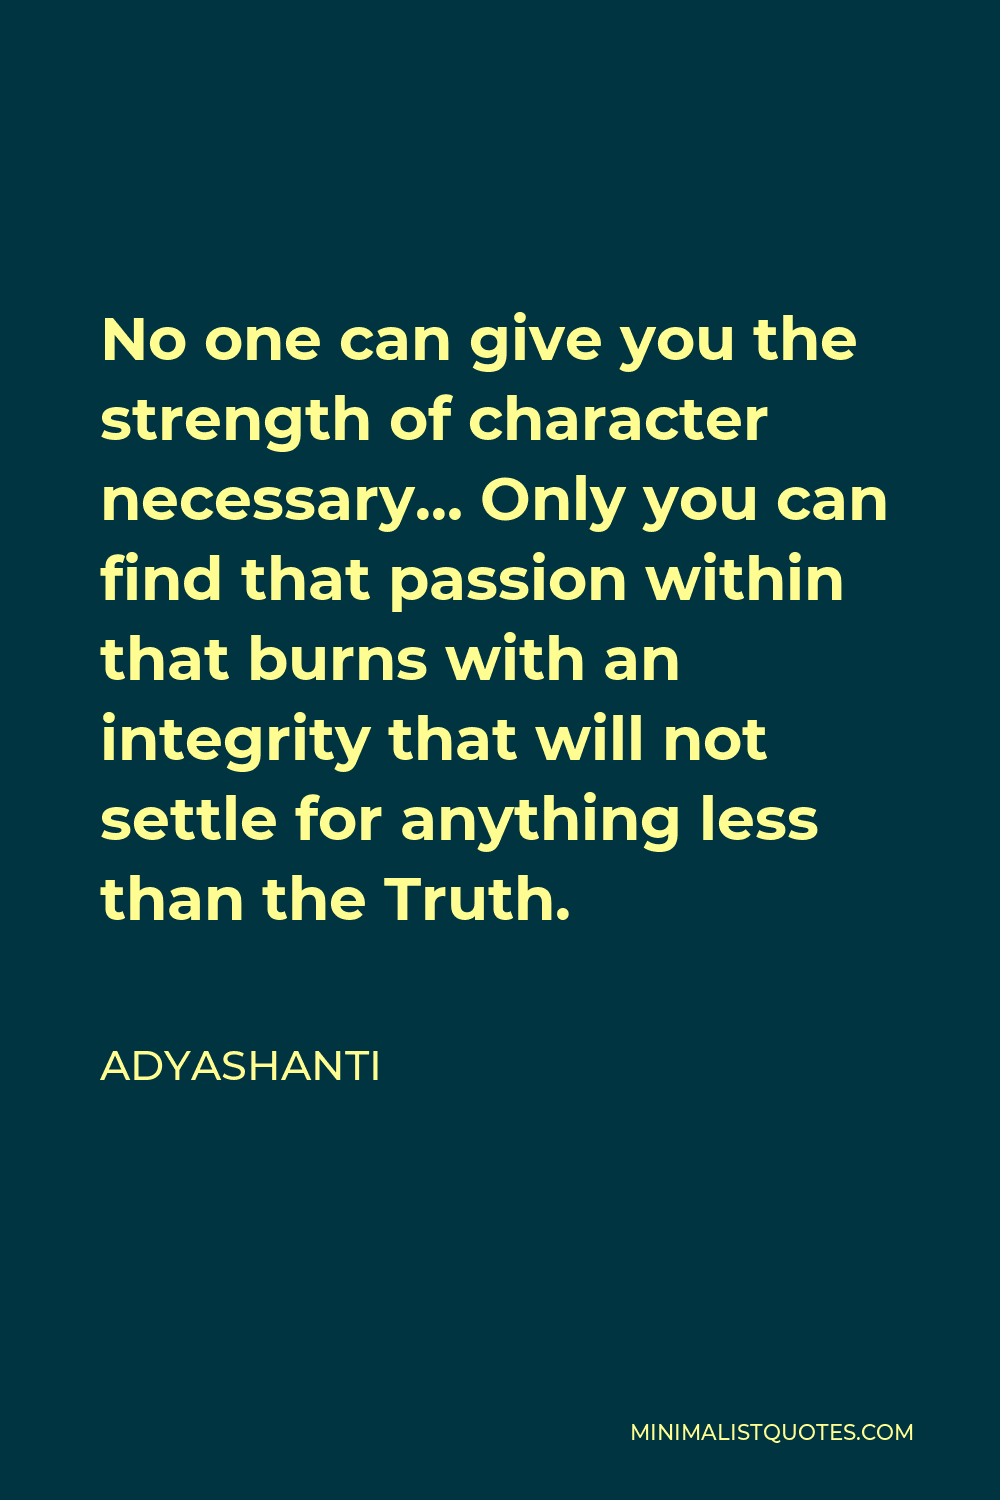 Adyashanti Quote - No one can give you the strength of character necessary… Only you can find that passion within that burns with an integrity that will not settle for anything less than the Truth.